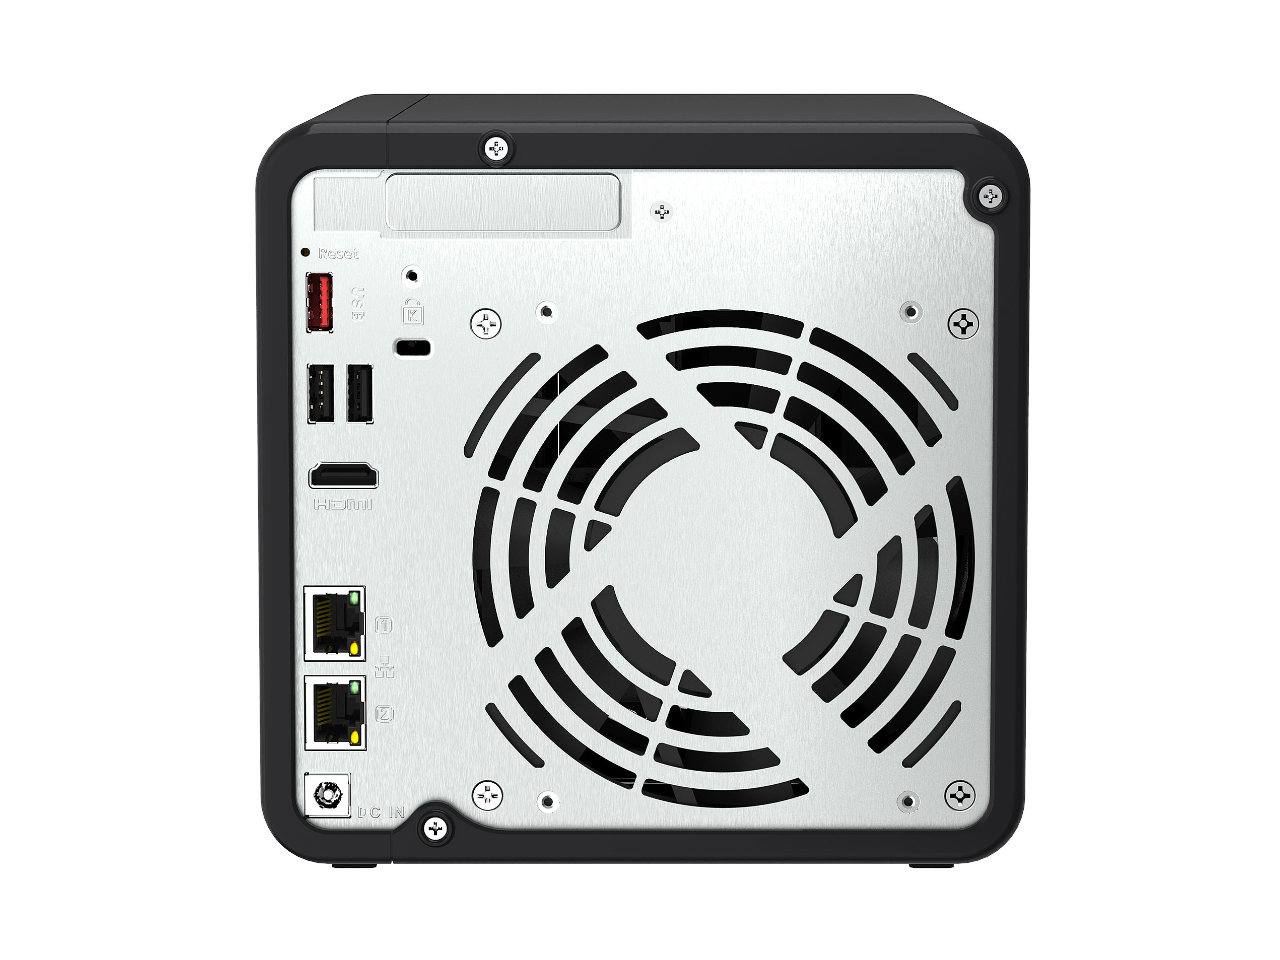 QNAP TS-464 4-Bay NAS with 8GB RAM and 8TB (4 x 2TB) of Seagate Ironwolf NAS Drives Fully Assembled and Tested1